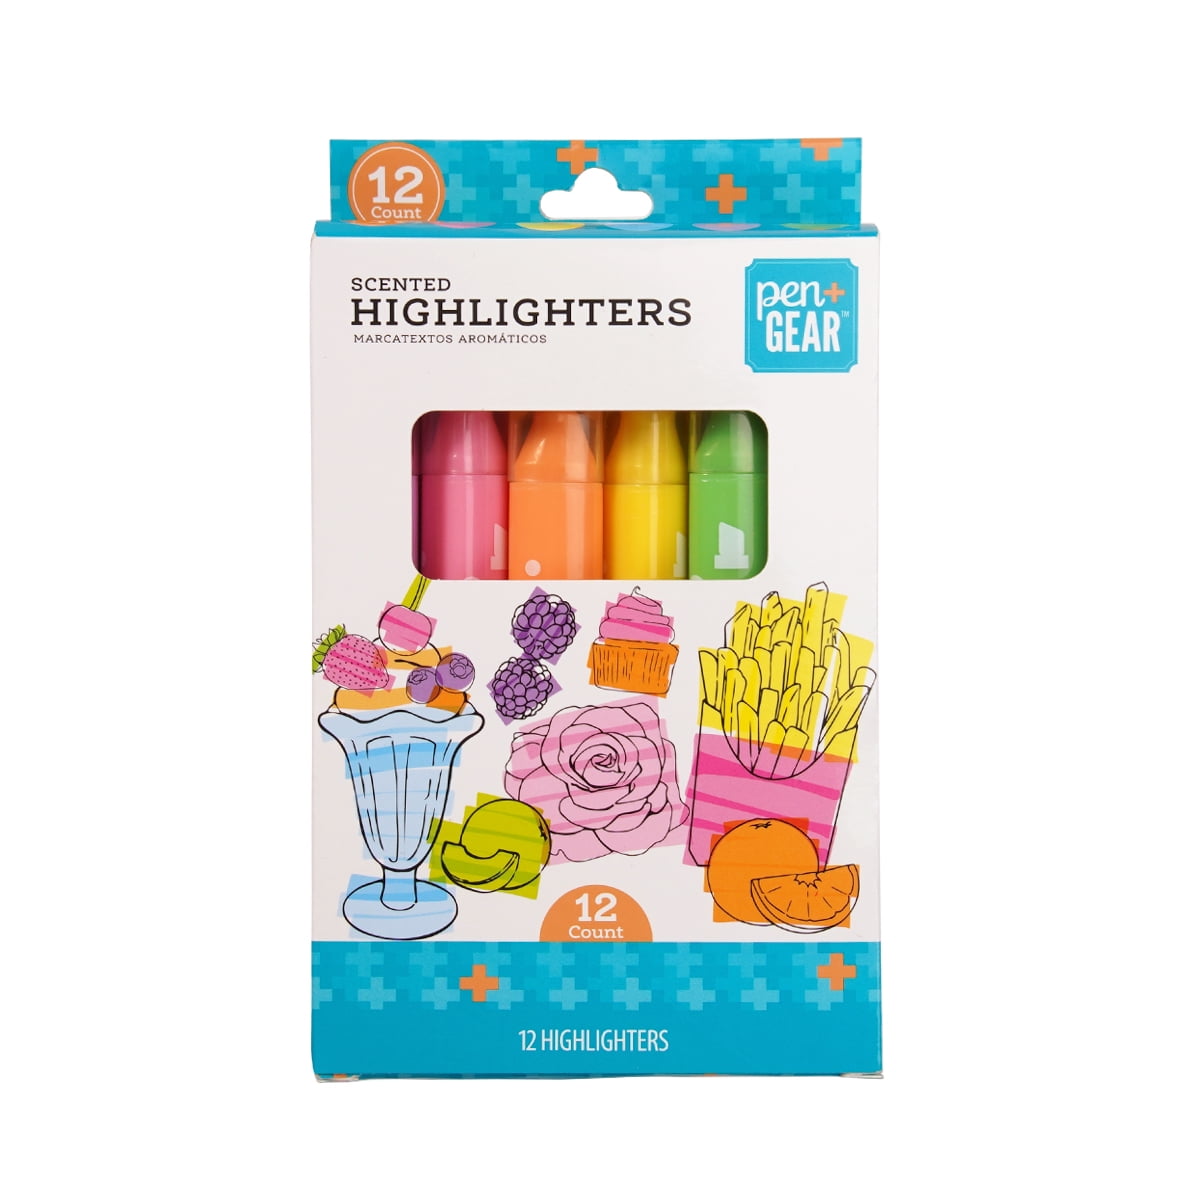 Pen + Gear Scented Highlighter, Assorted Color, 12 Count